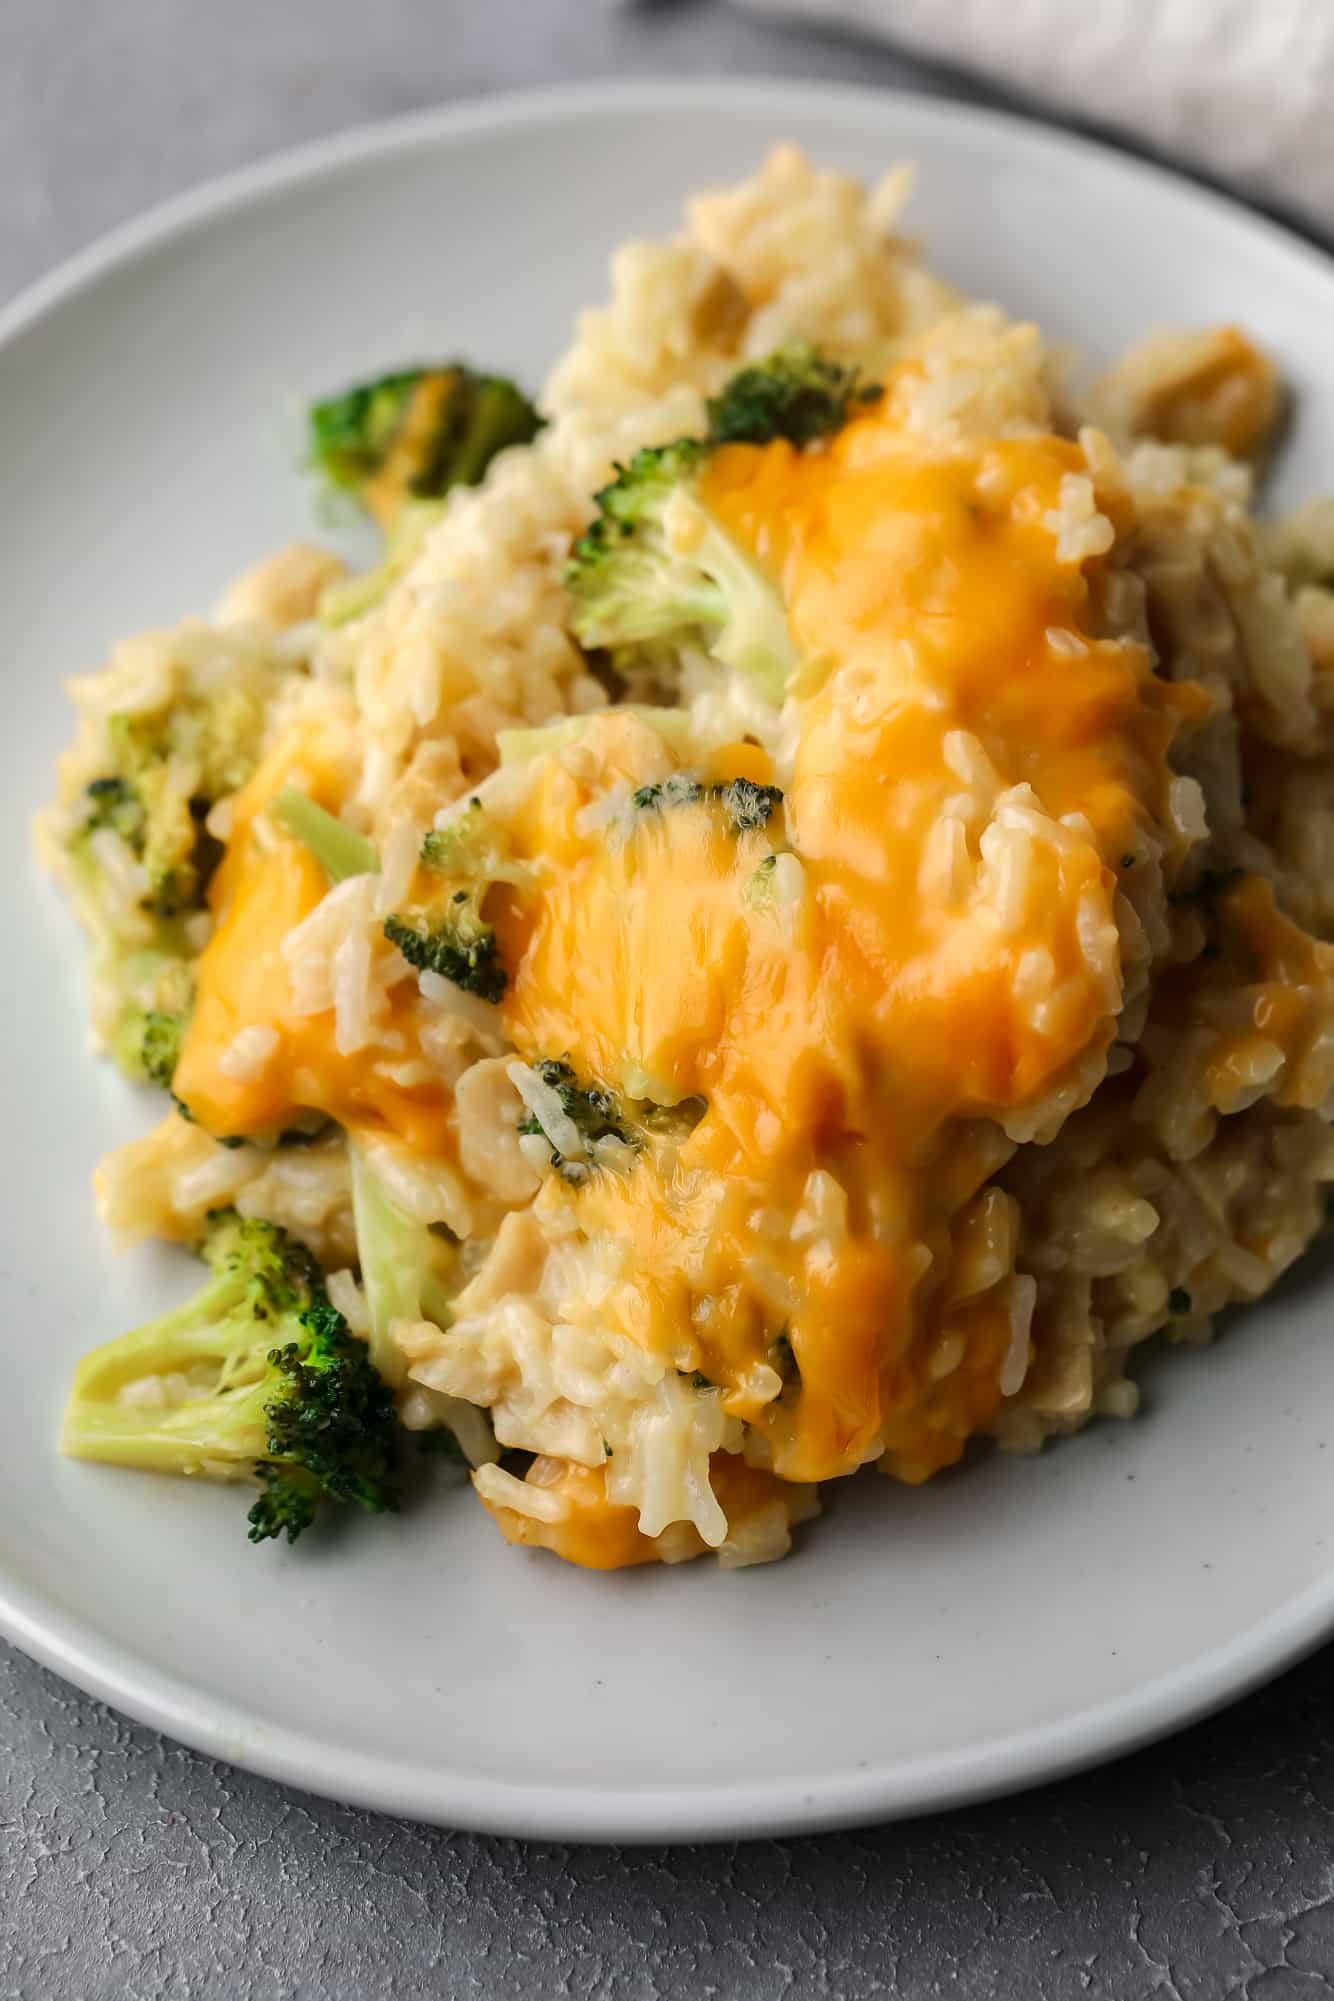 A scoop of a cheese-covered broccoli and rice vegan casserole on a small grey plate.